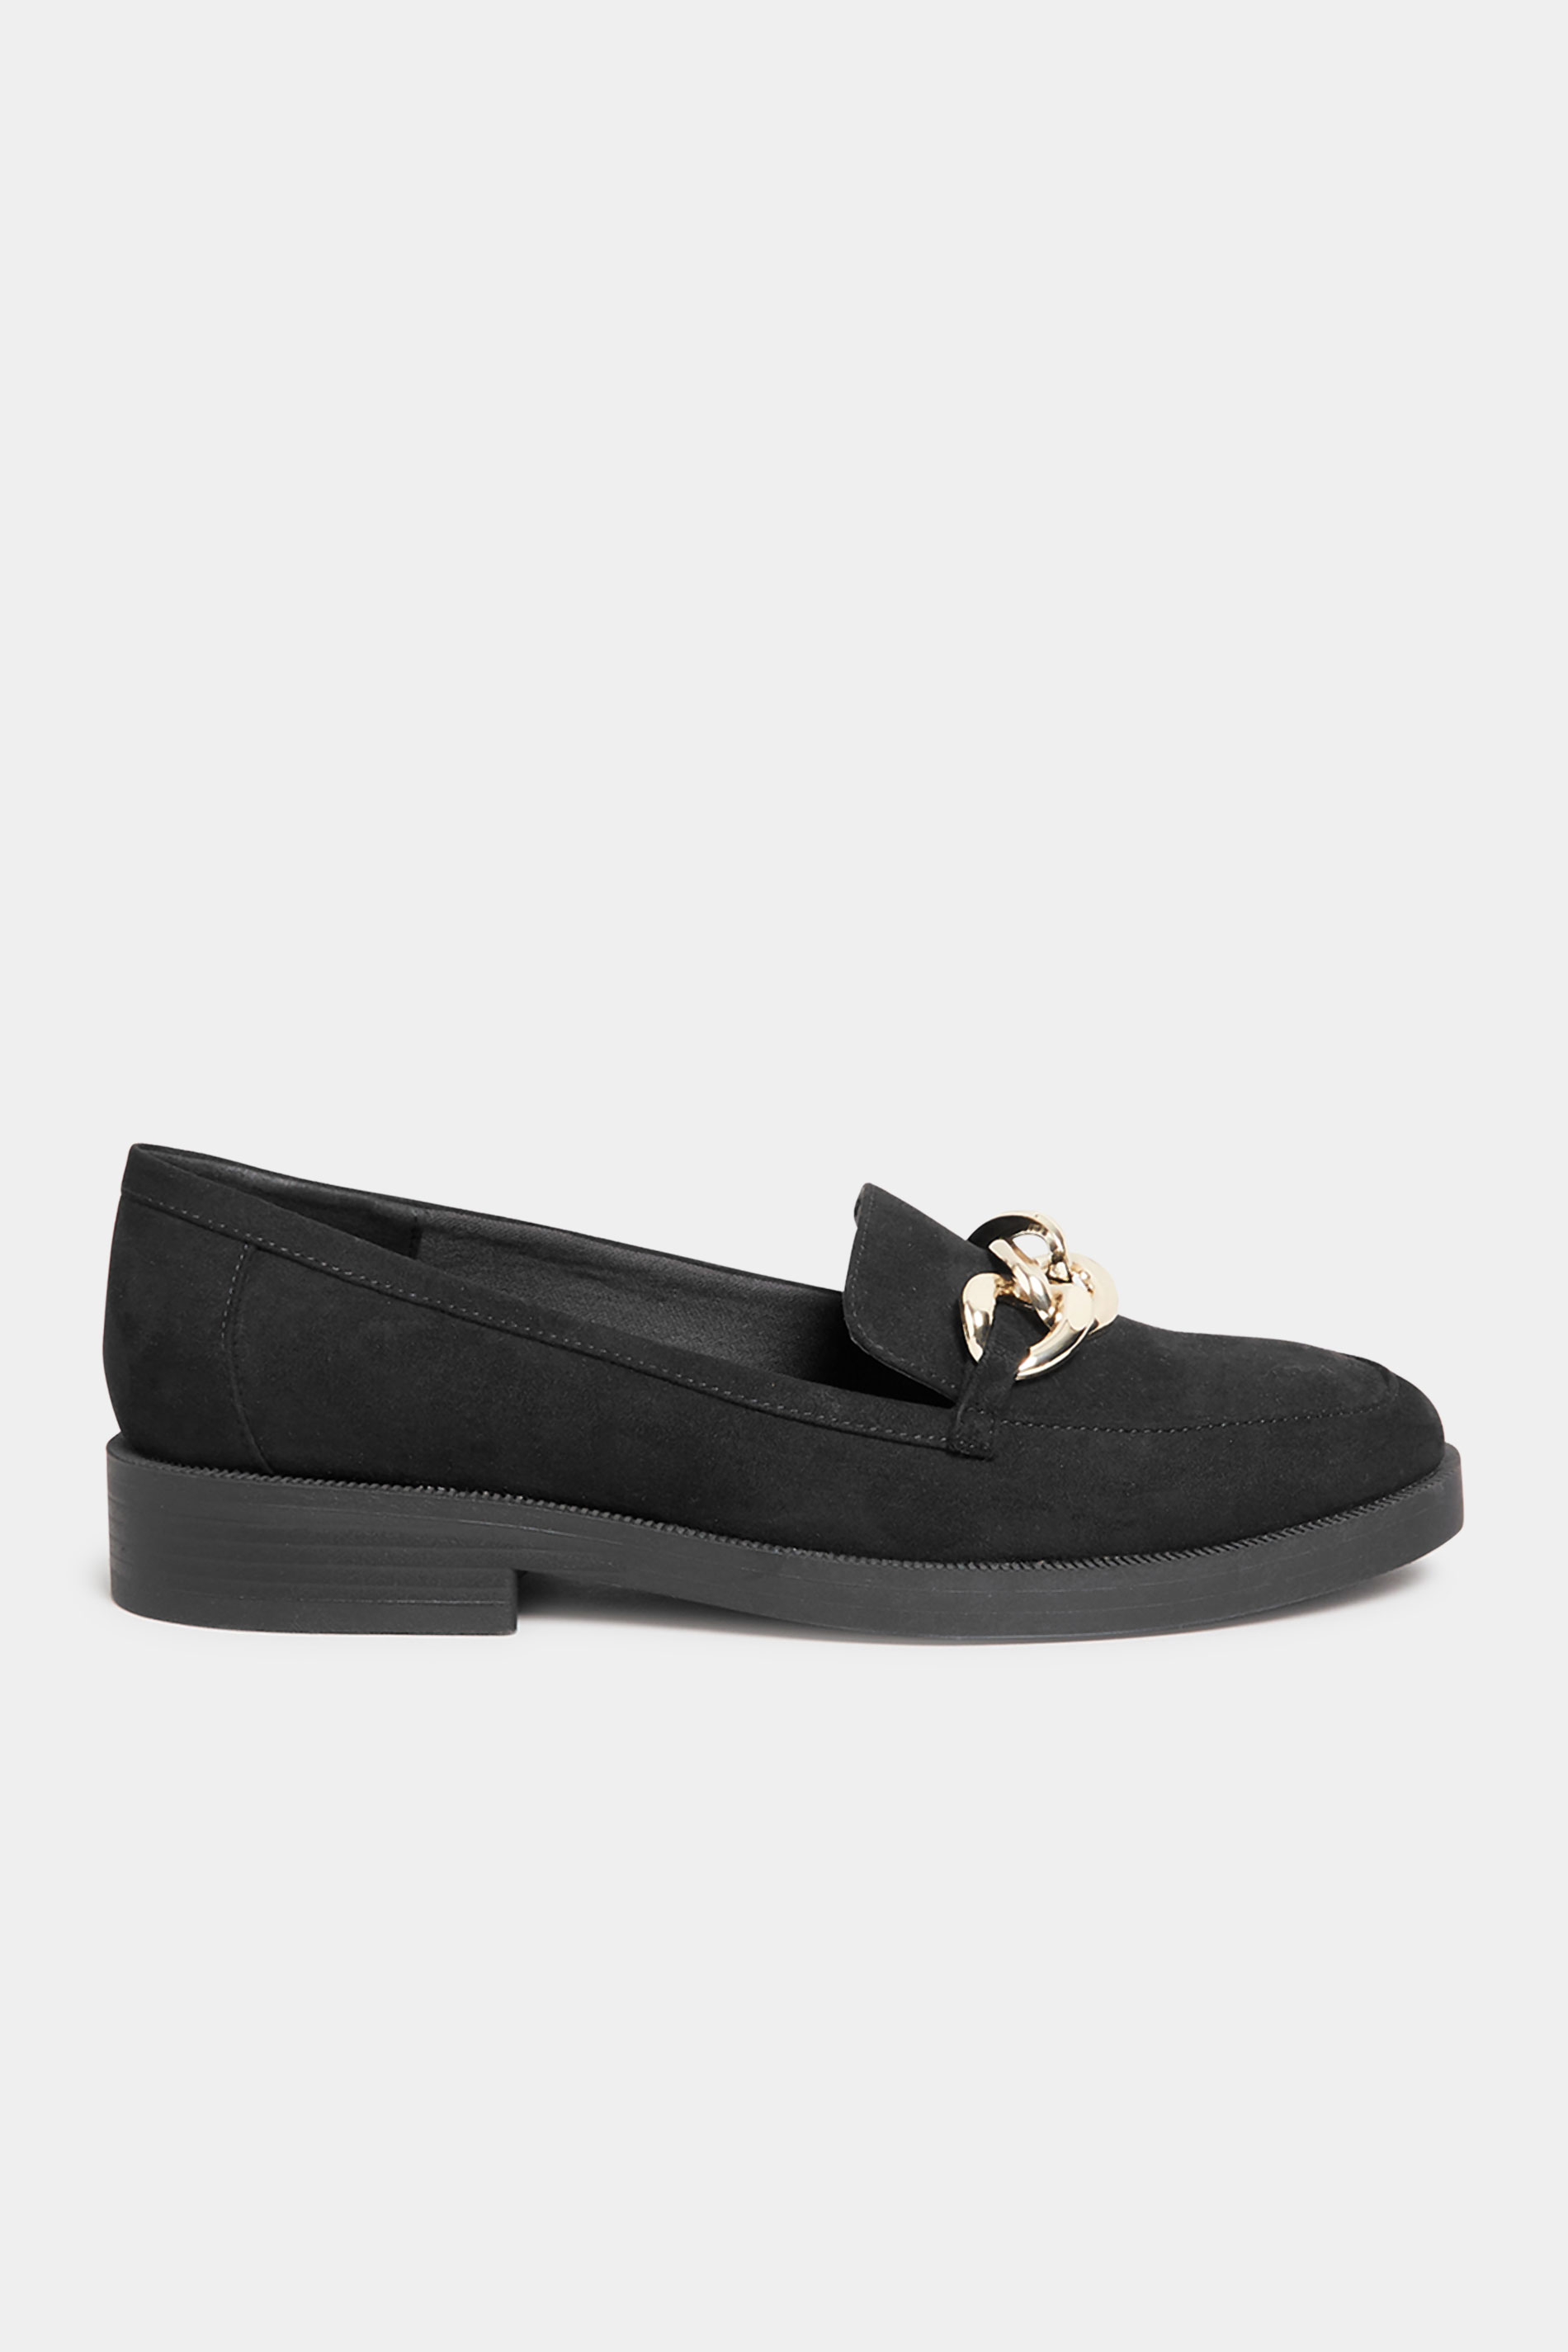 Black Faux Suede Chain Detail Loafers In Wide E Fit & Extra Wide EEE ...